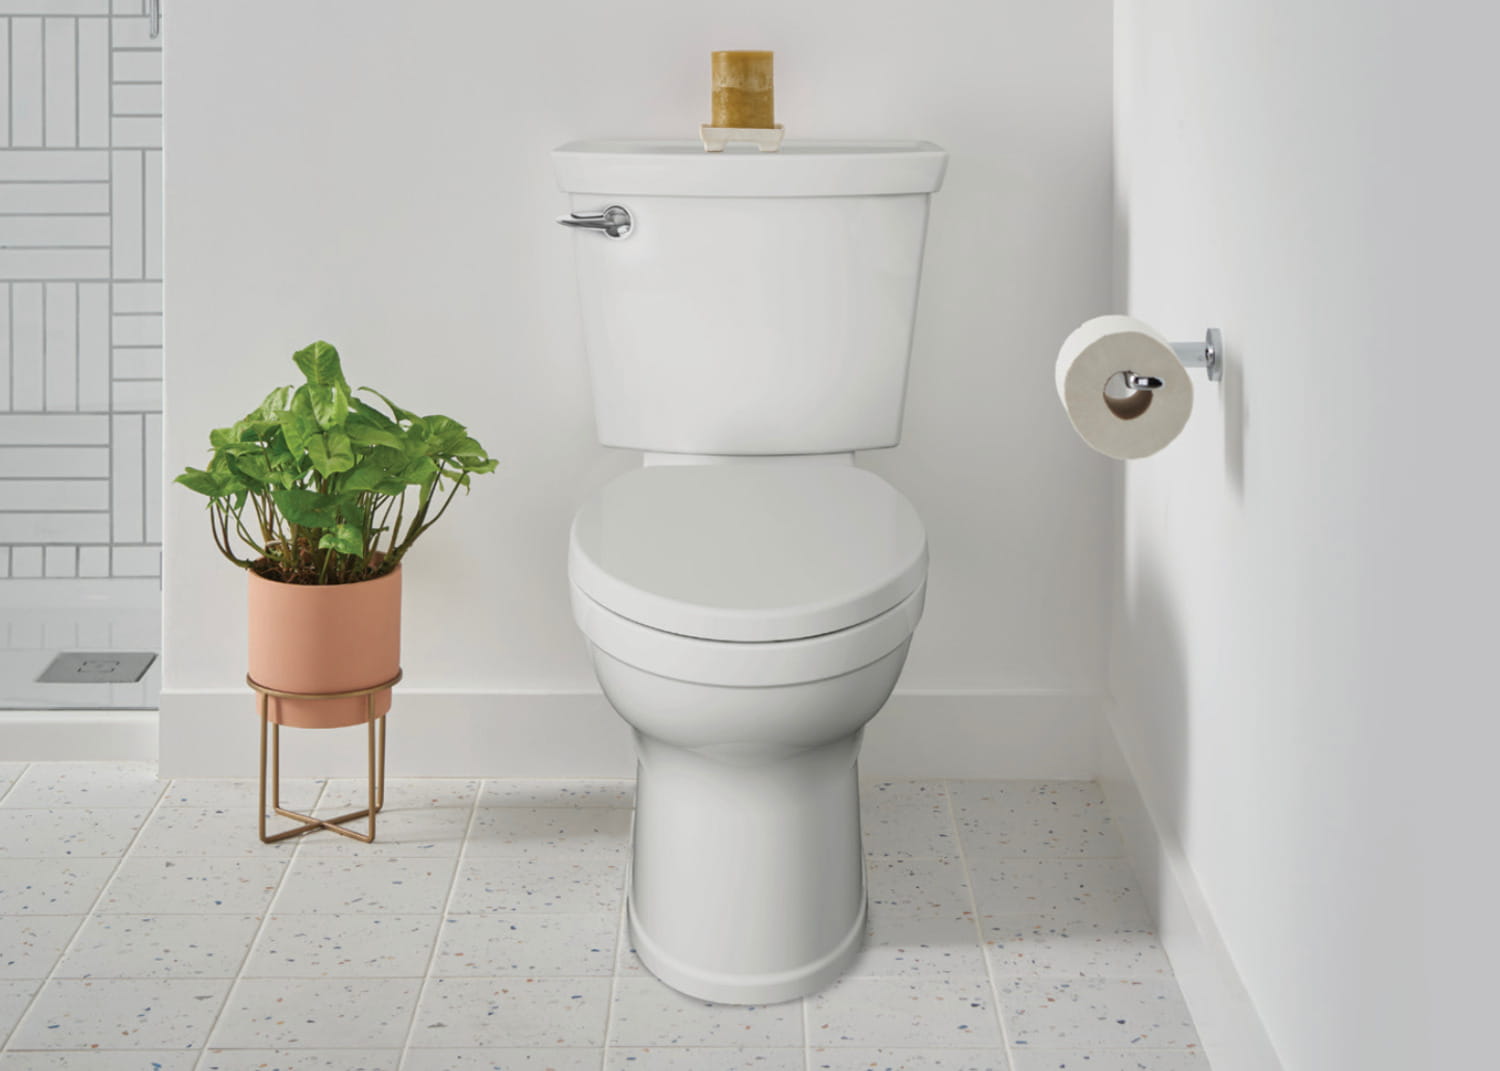 toilet buying guide